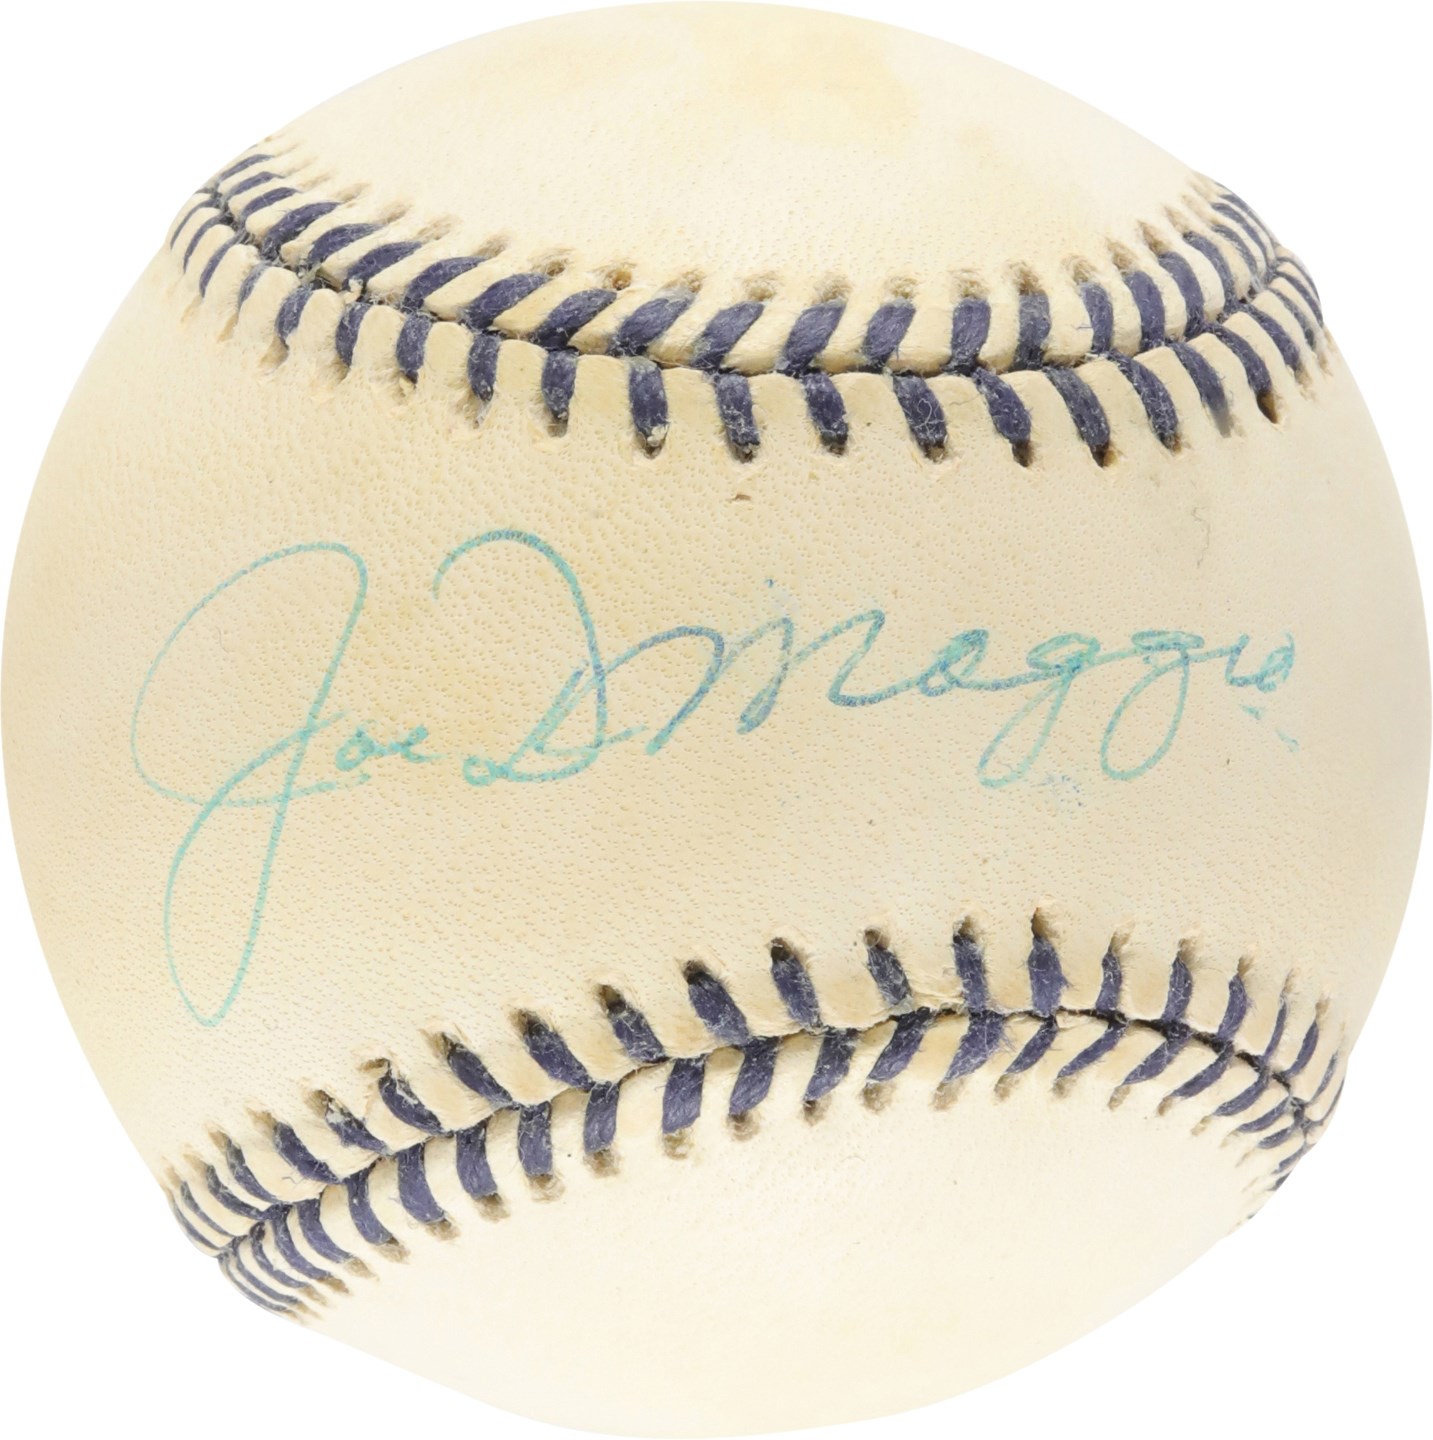 - Rare 1996 Mickey Mantle Day Game Used Ball Signed by Joe DiMaggio (PSA)